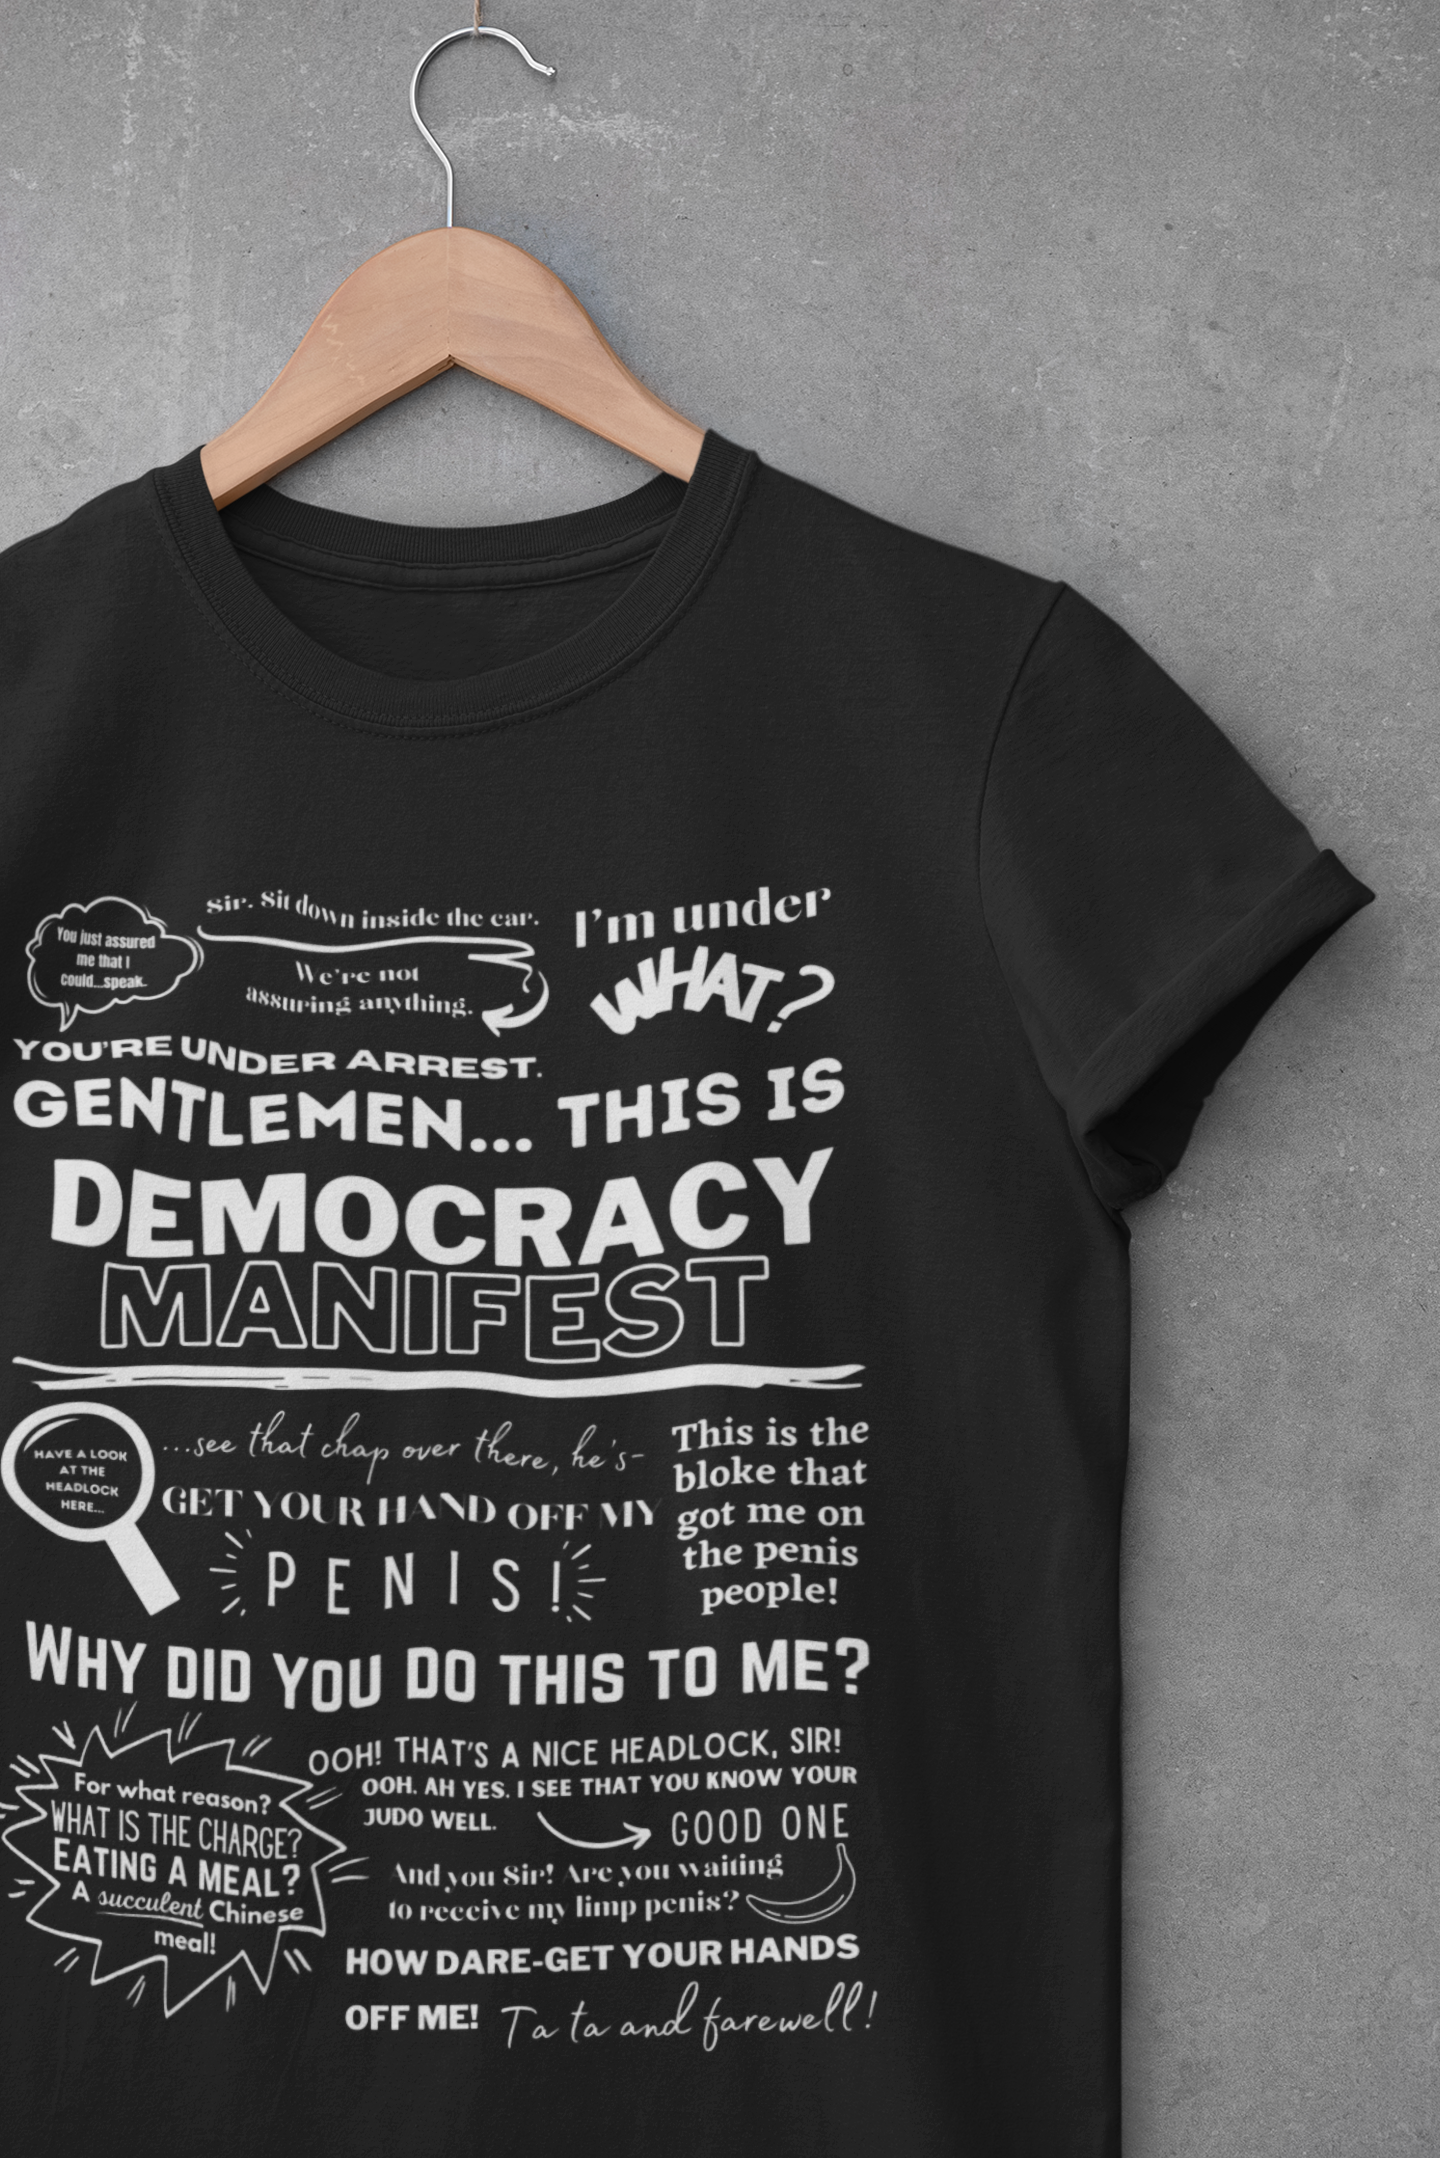 This is Democracy Manifest T-Shirt